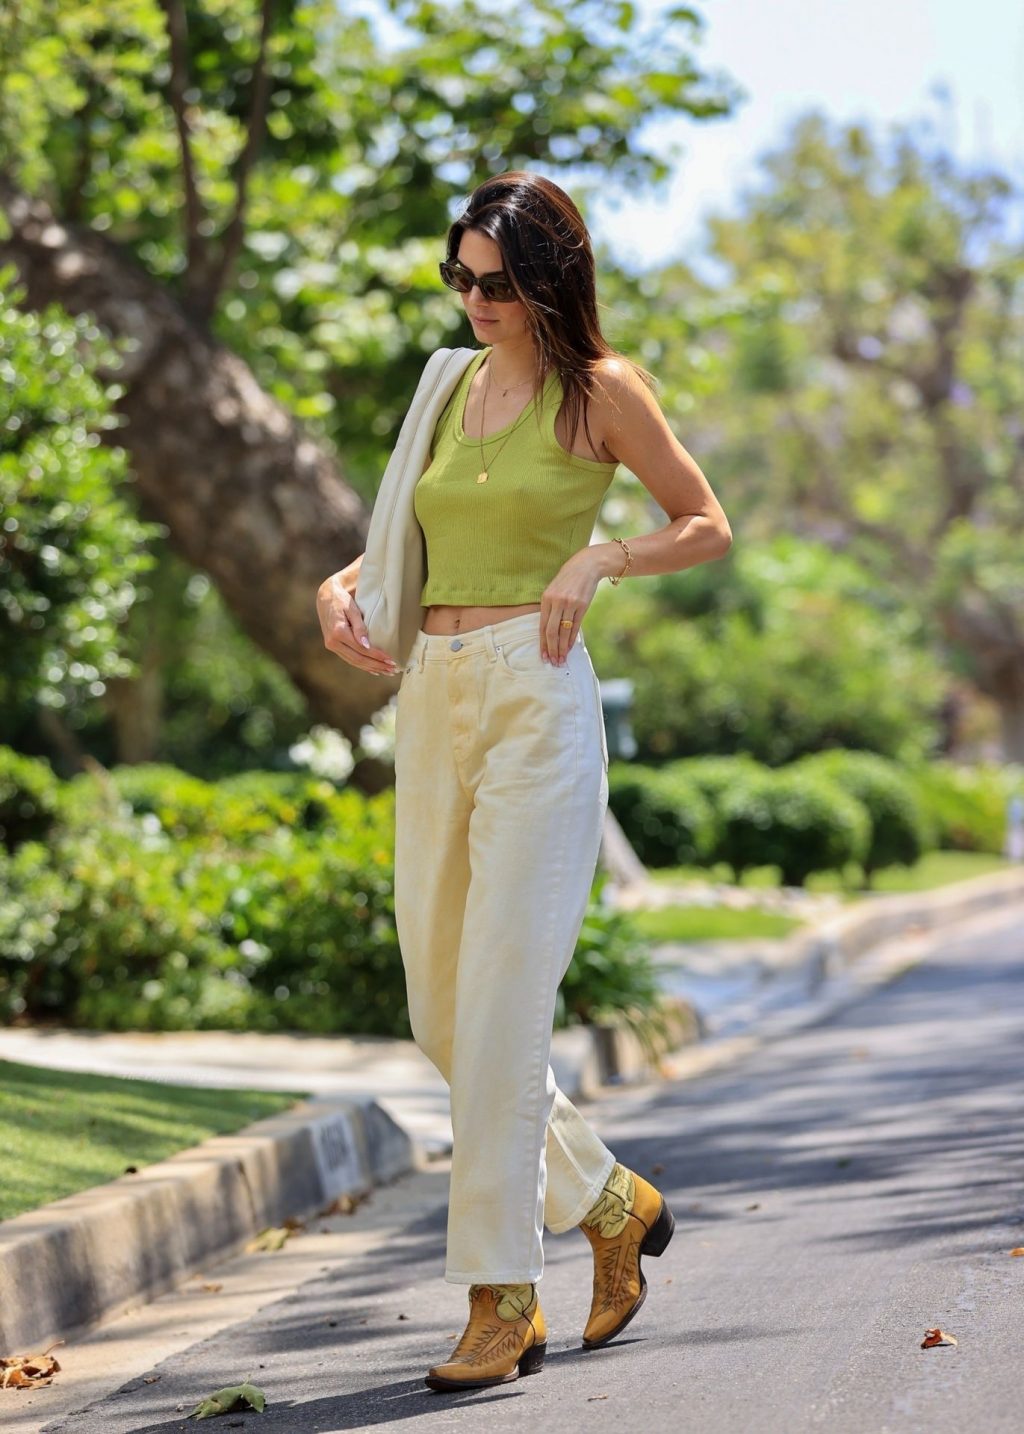 Kendall Jenner Stuns in a Crop Top Without a Bra as She Makes a Pit Stop at the Gas Pump (21 Photos) [Updated]